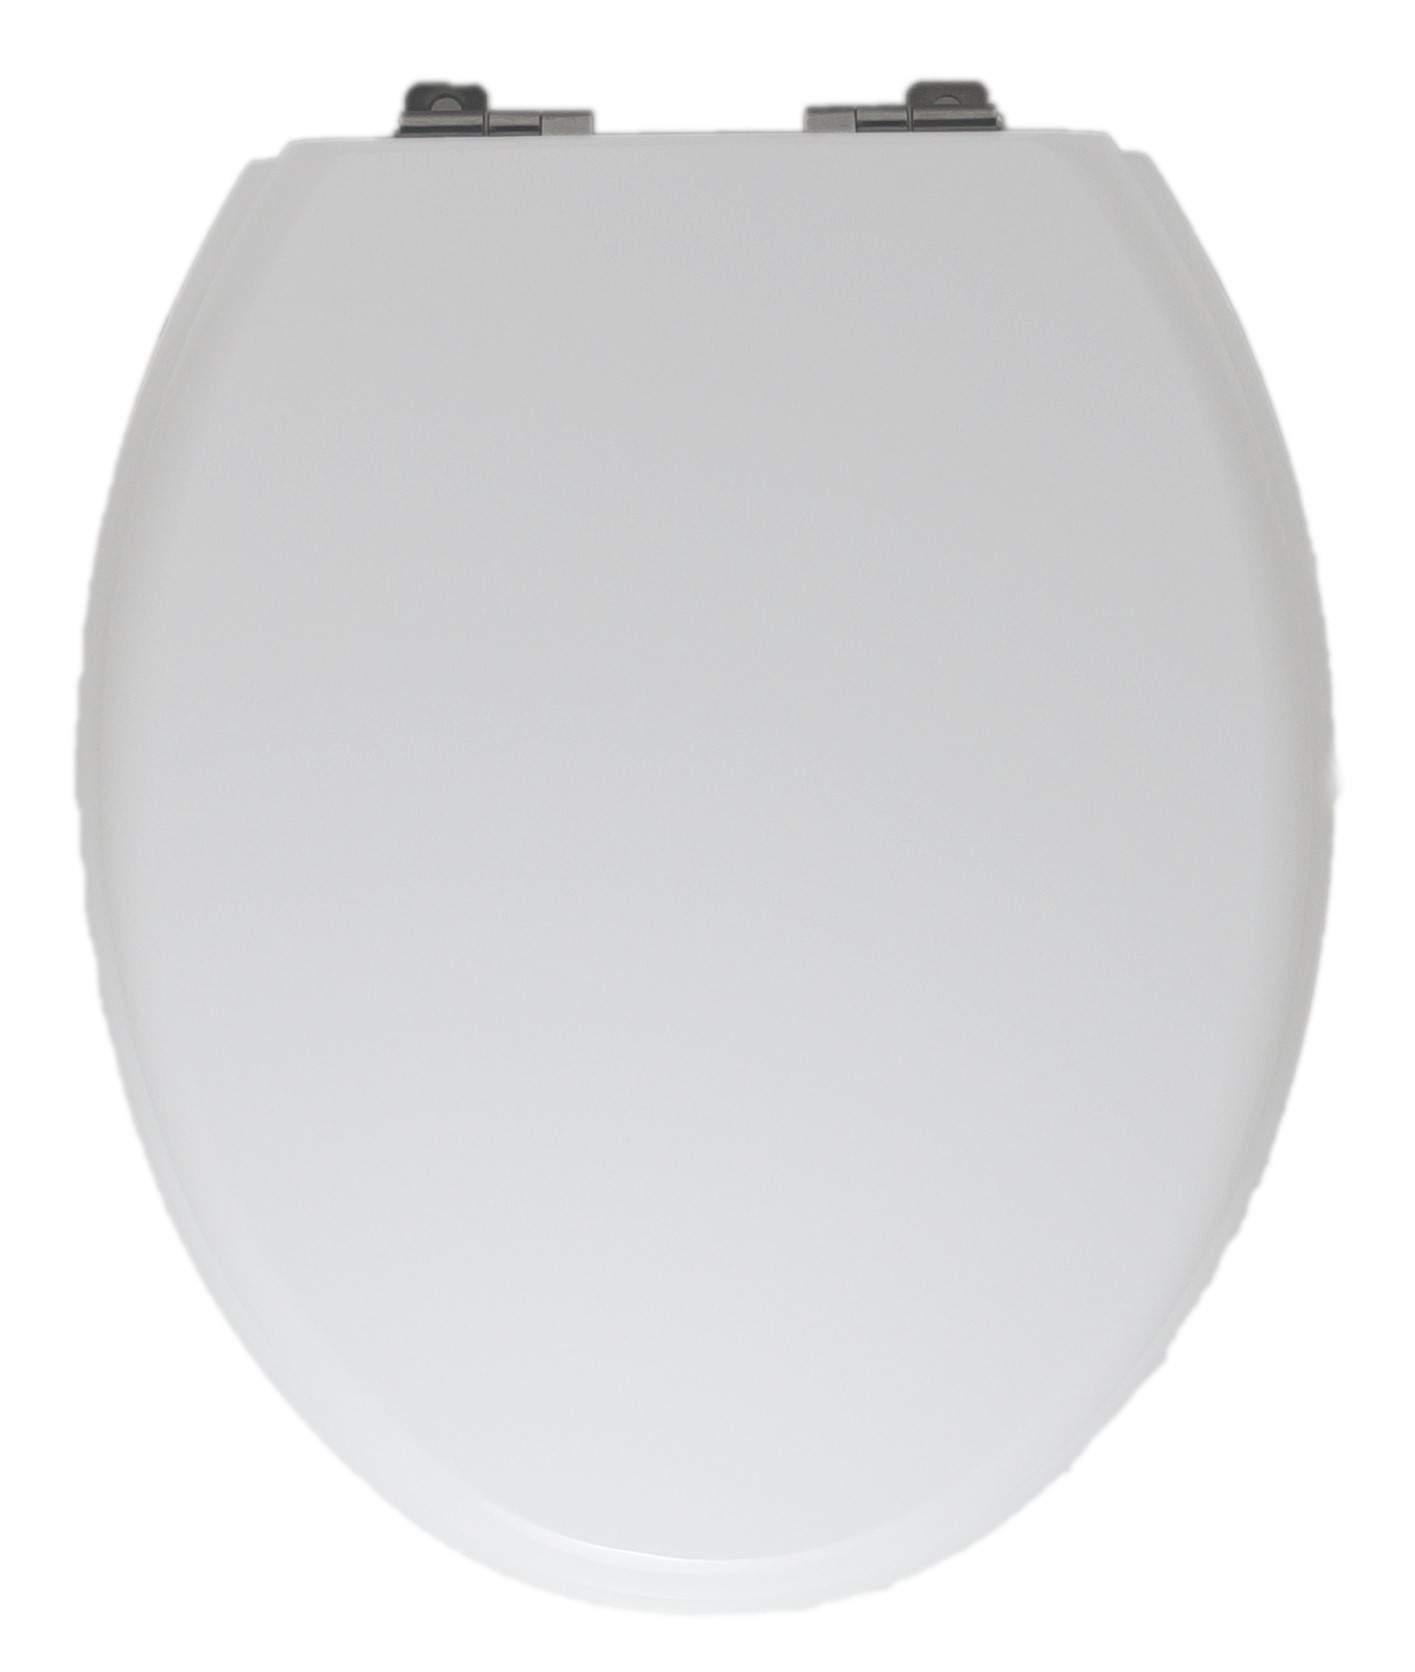 Toilet seat Courchevel by SELLES